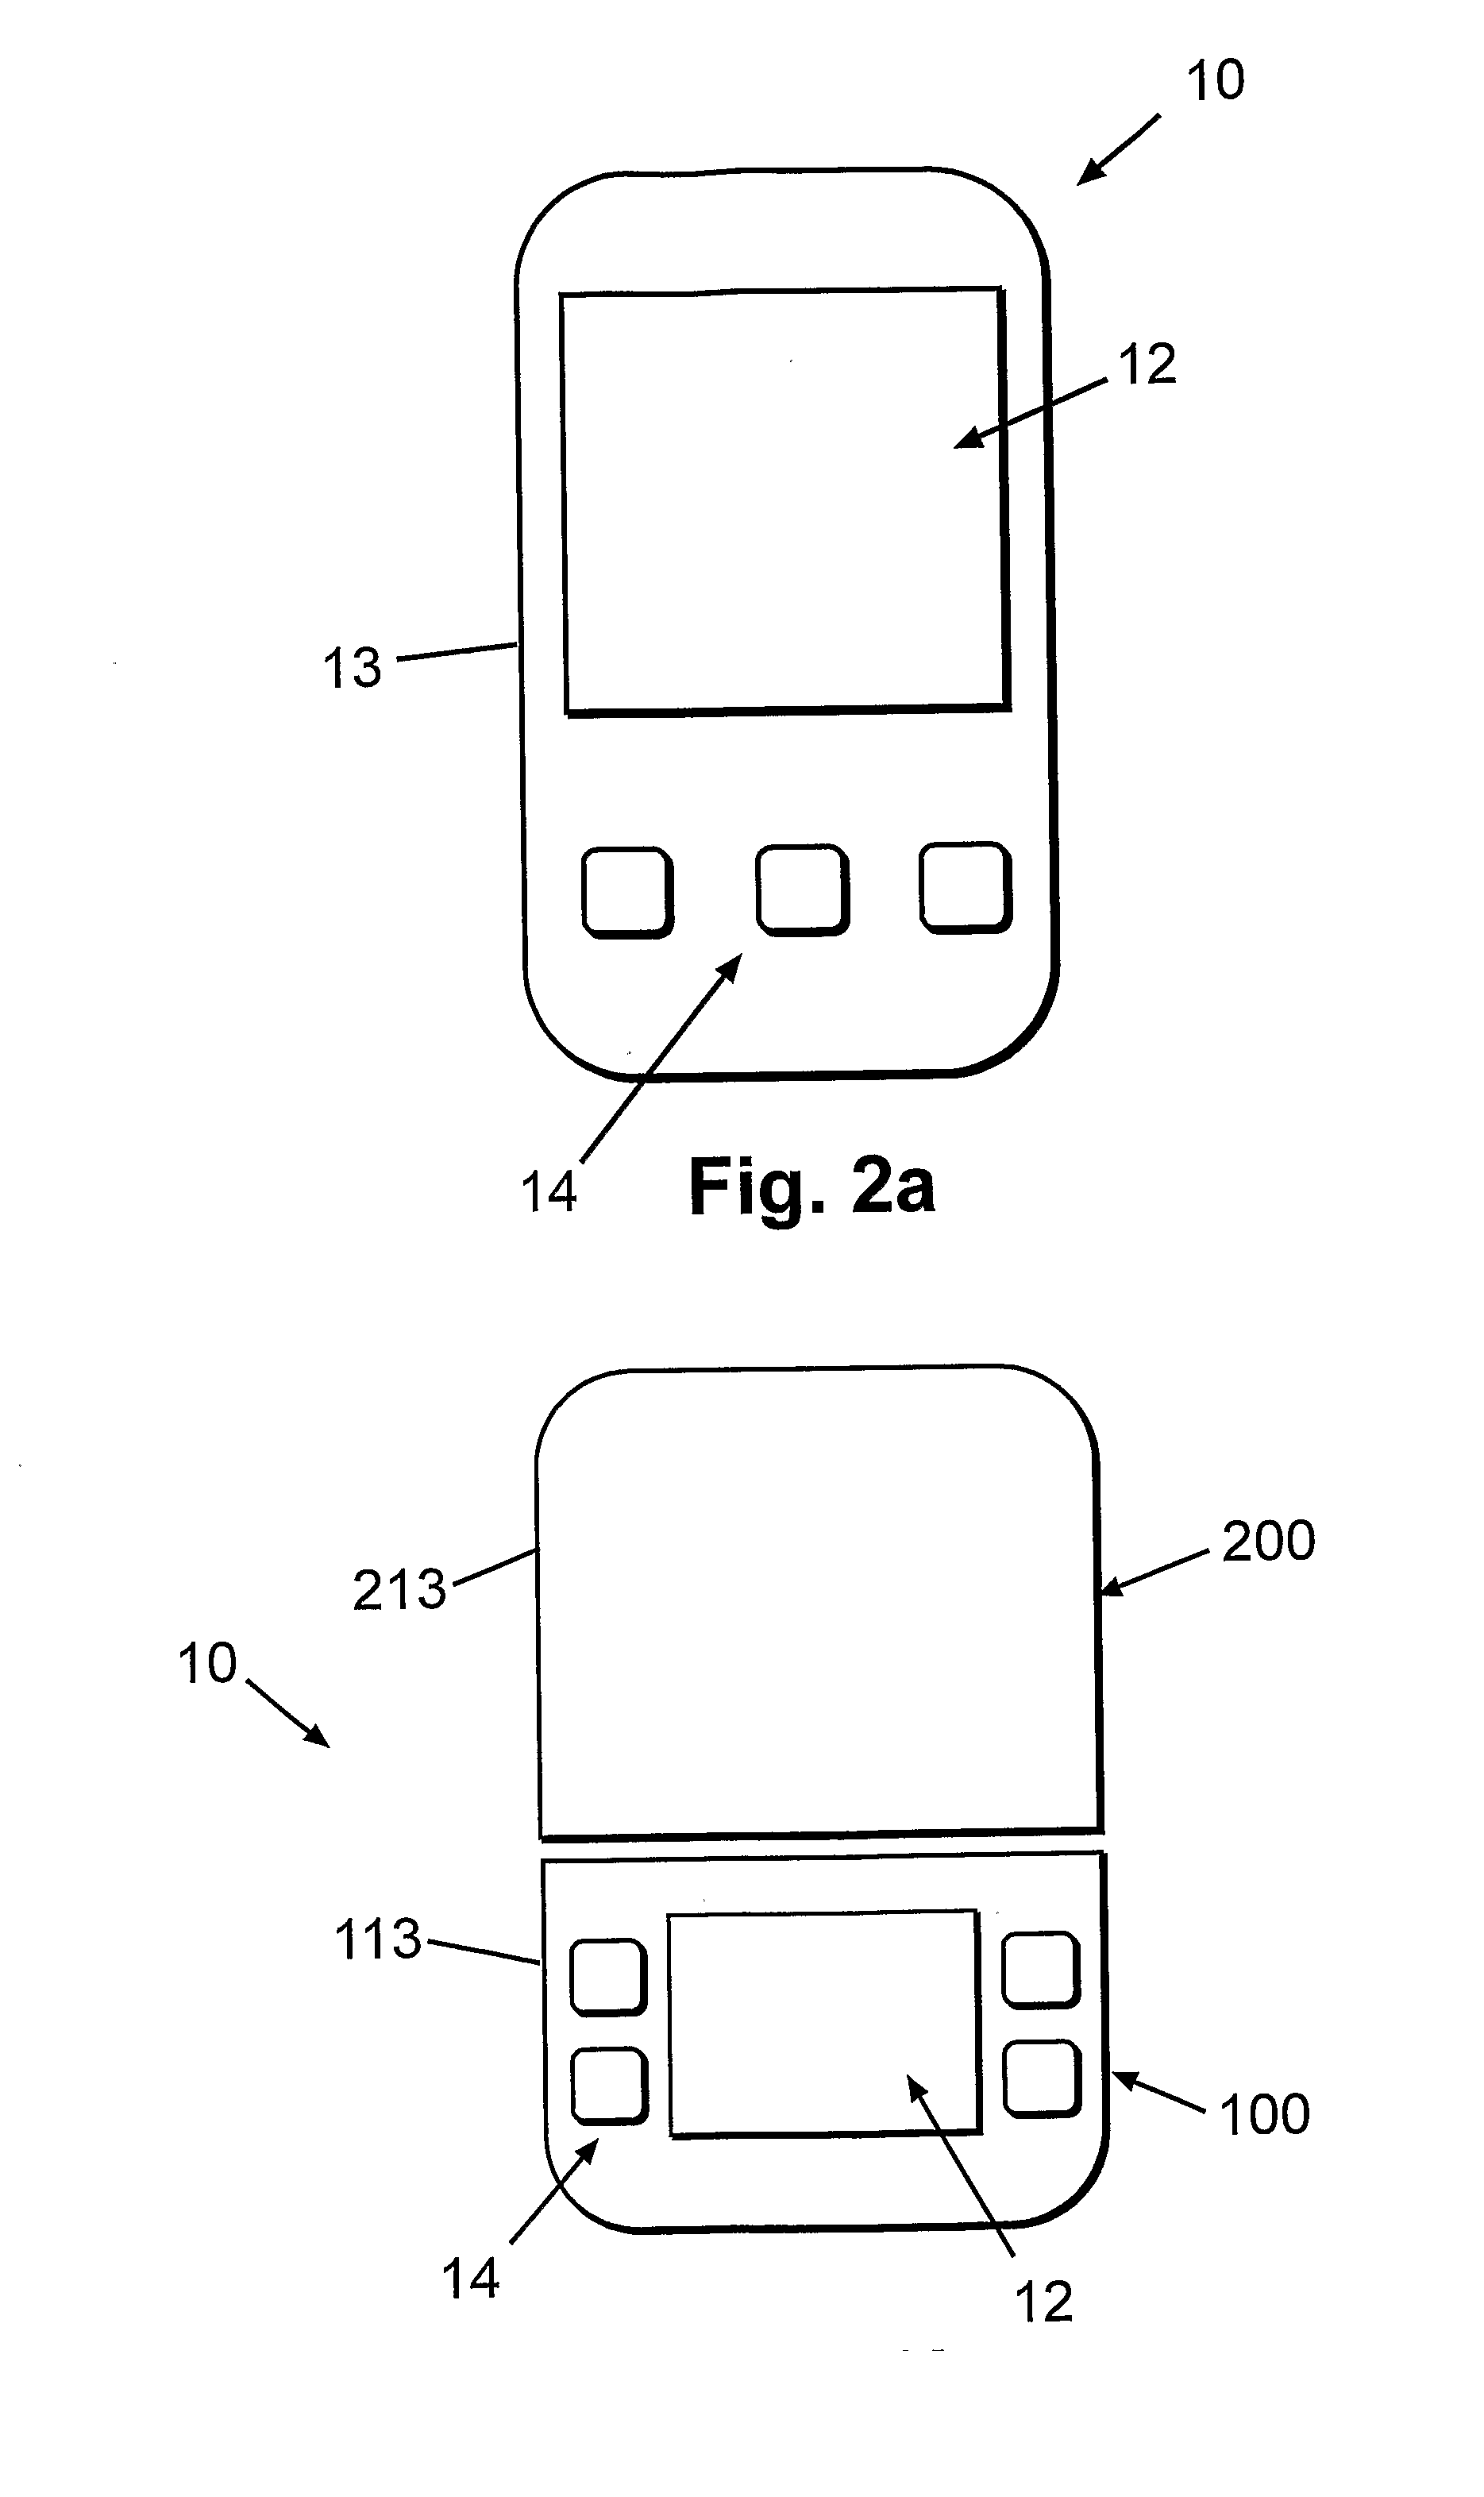 Portable infusion device with means for monitoring and controlling fluid delivery